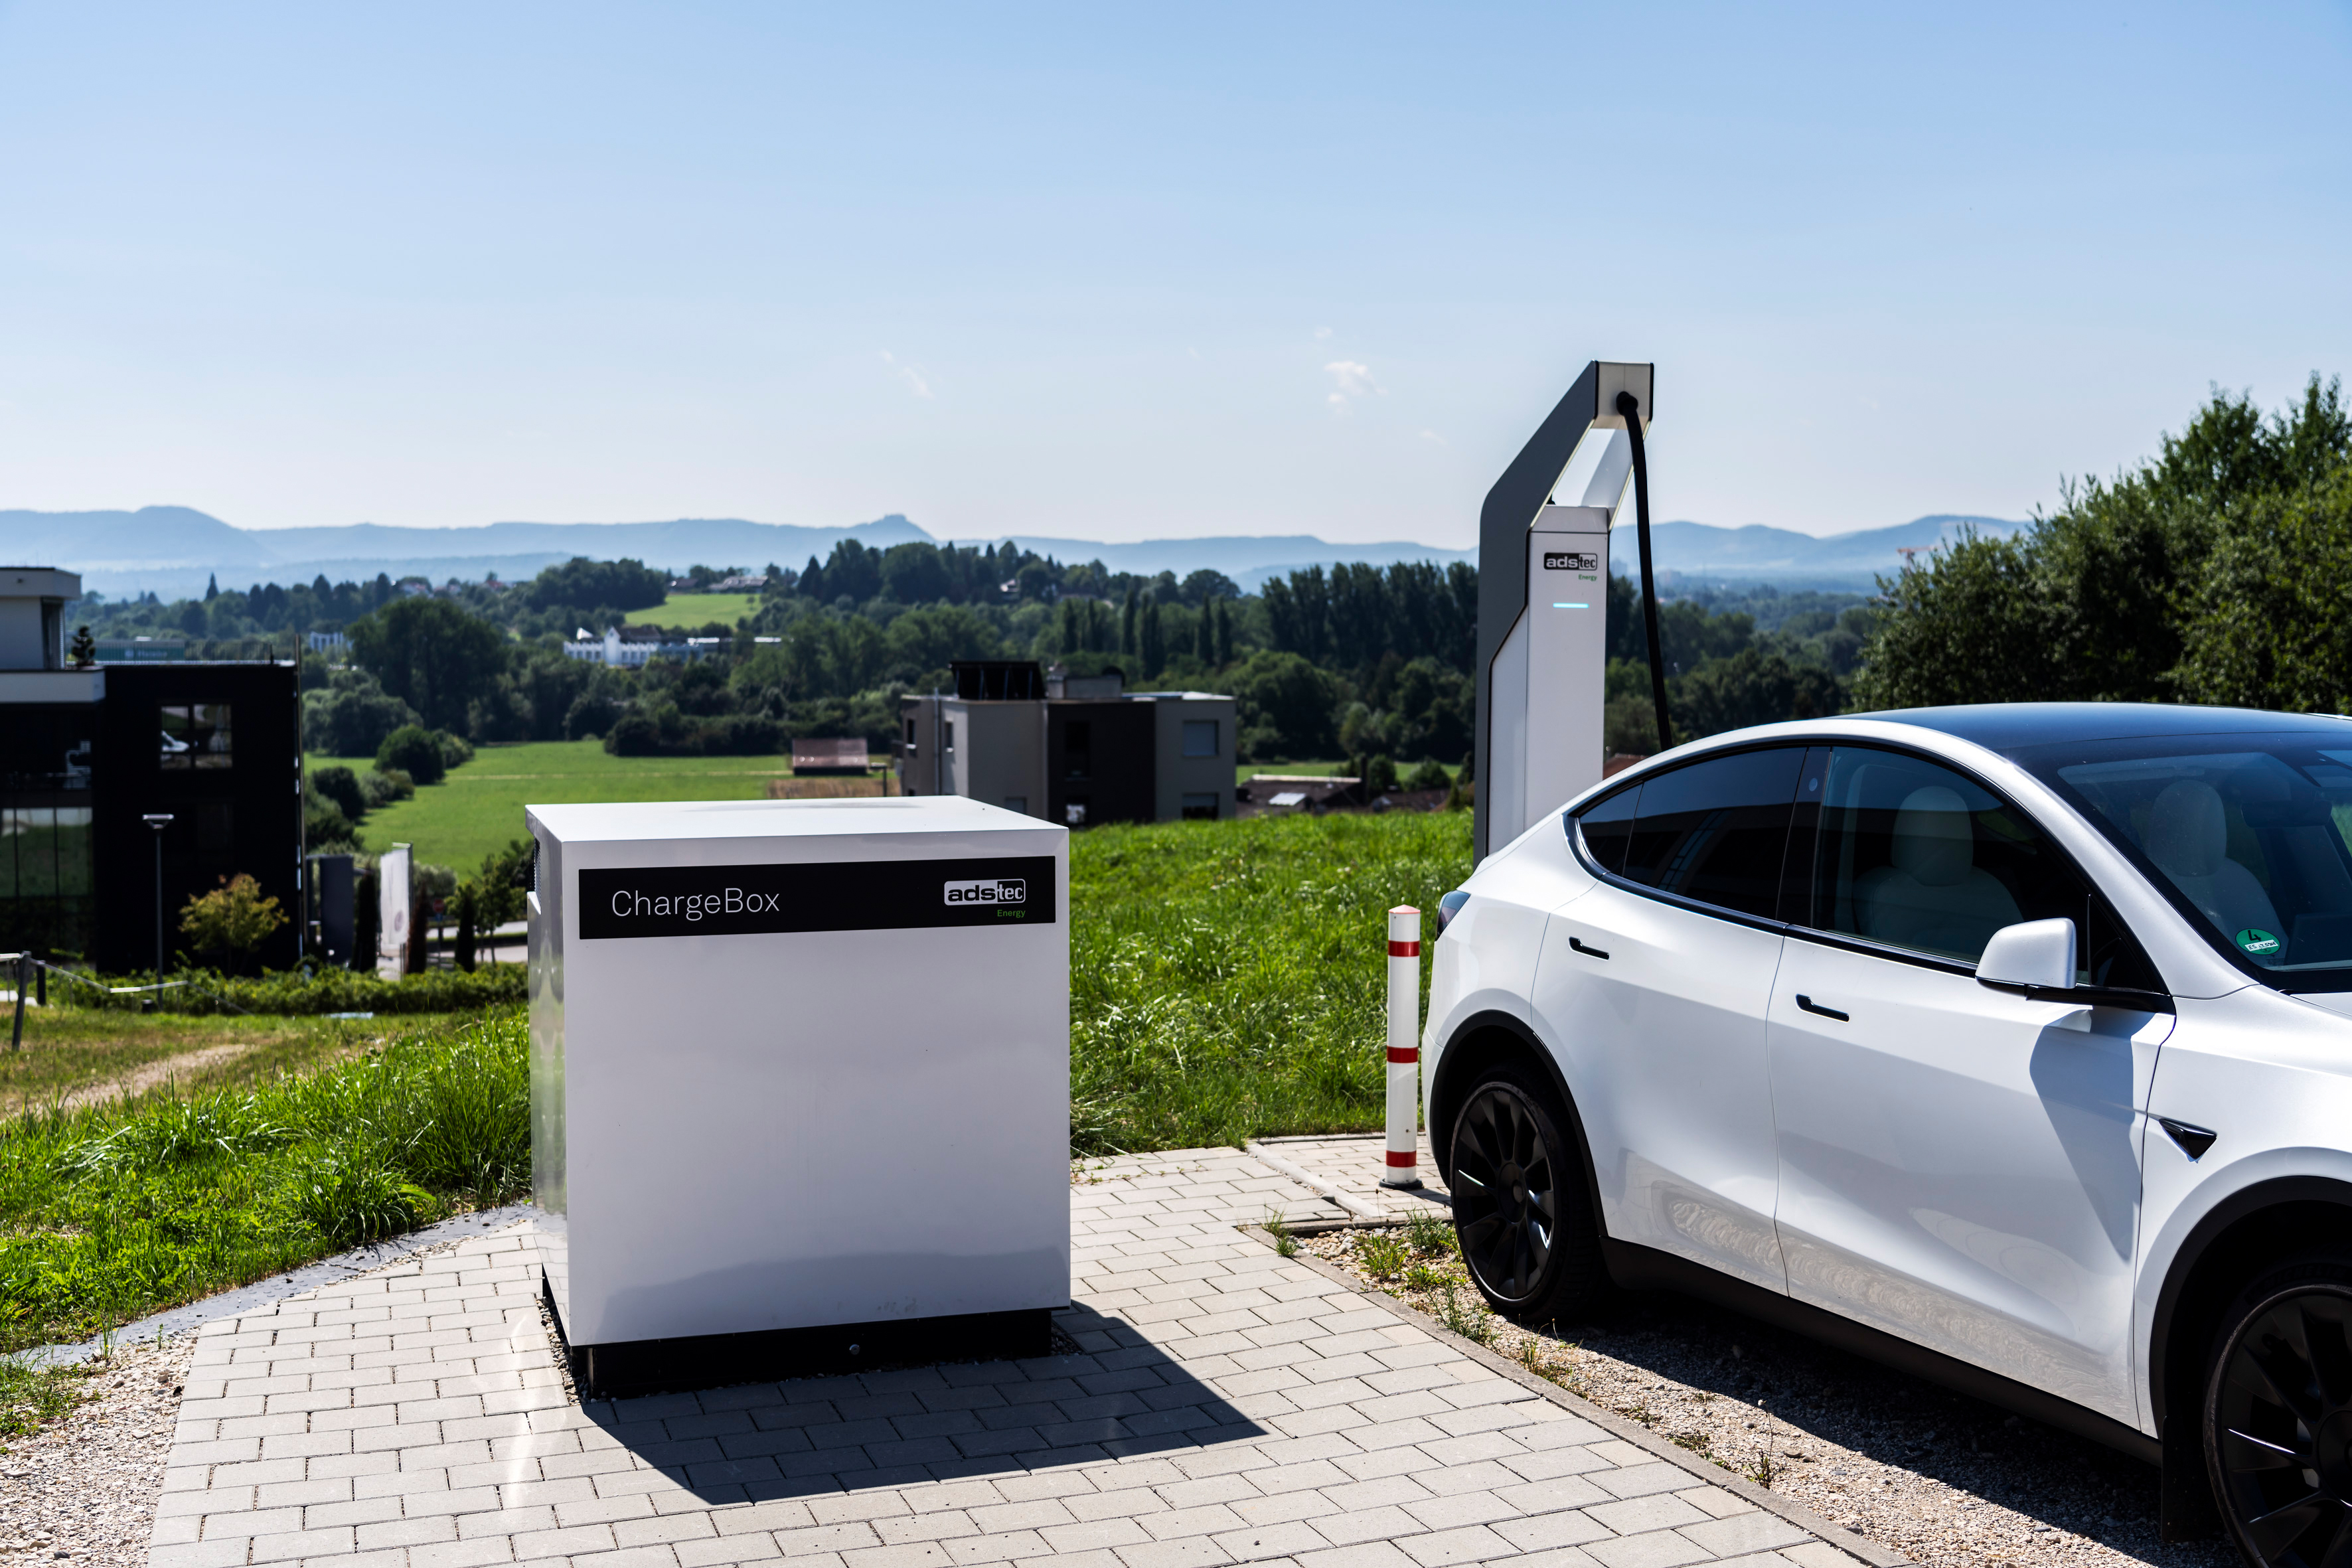 ChargeBox allows up to two vehicles to be fast-charged 